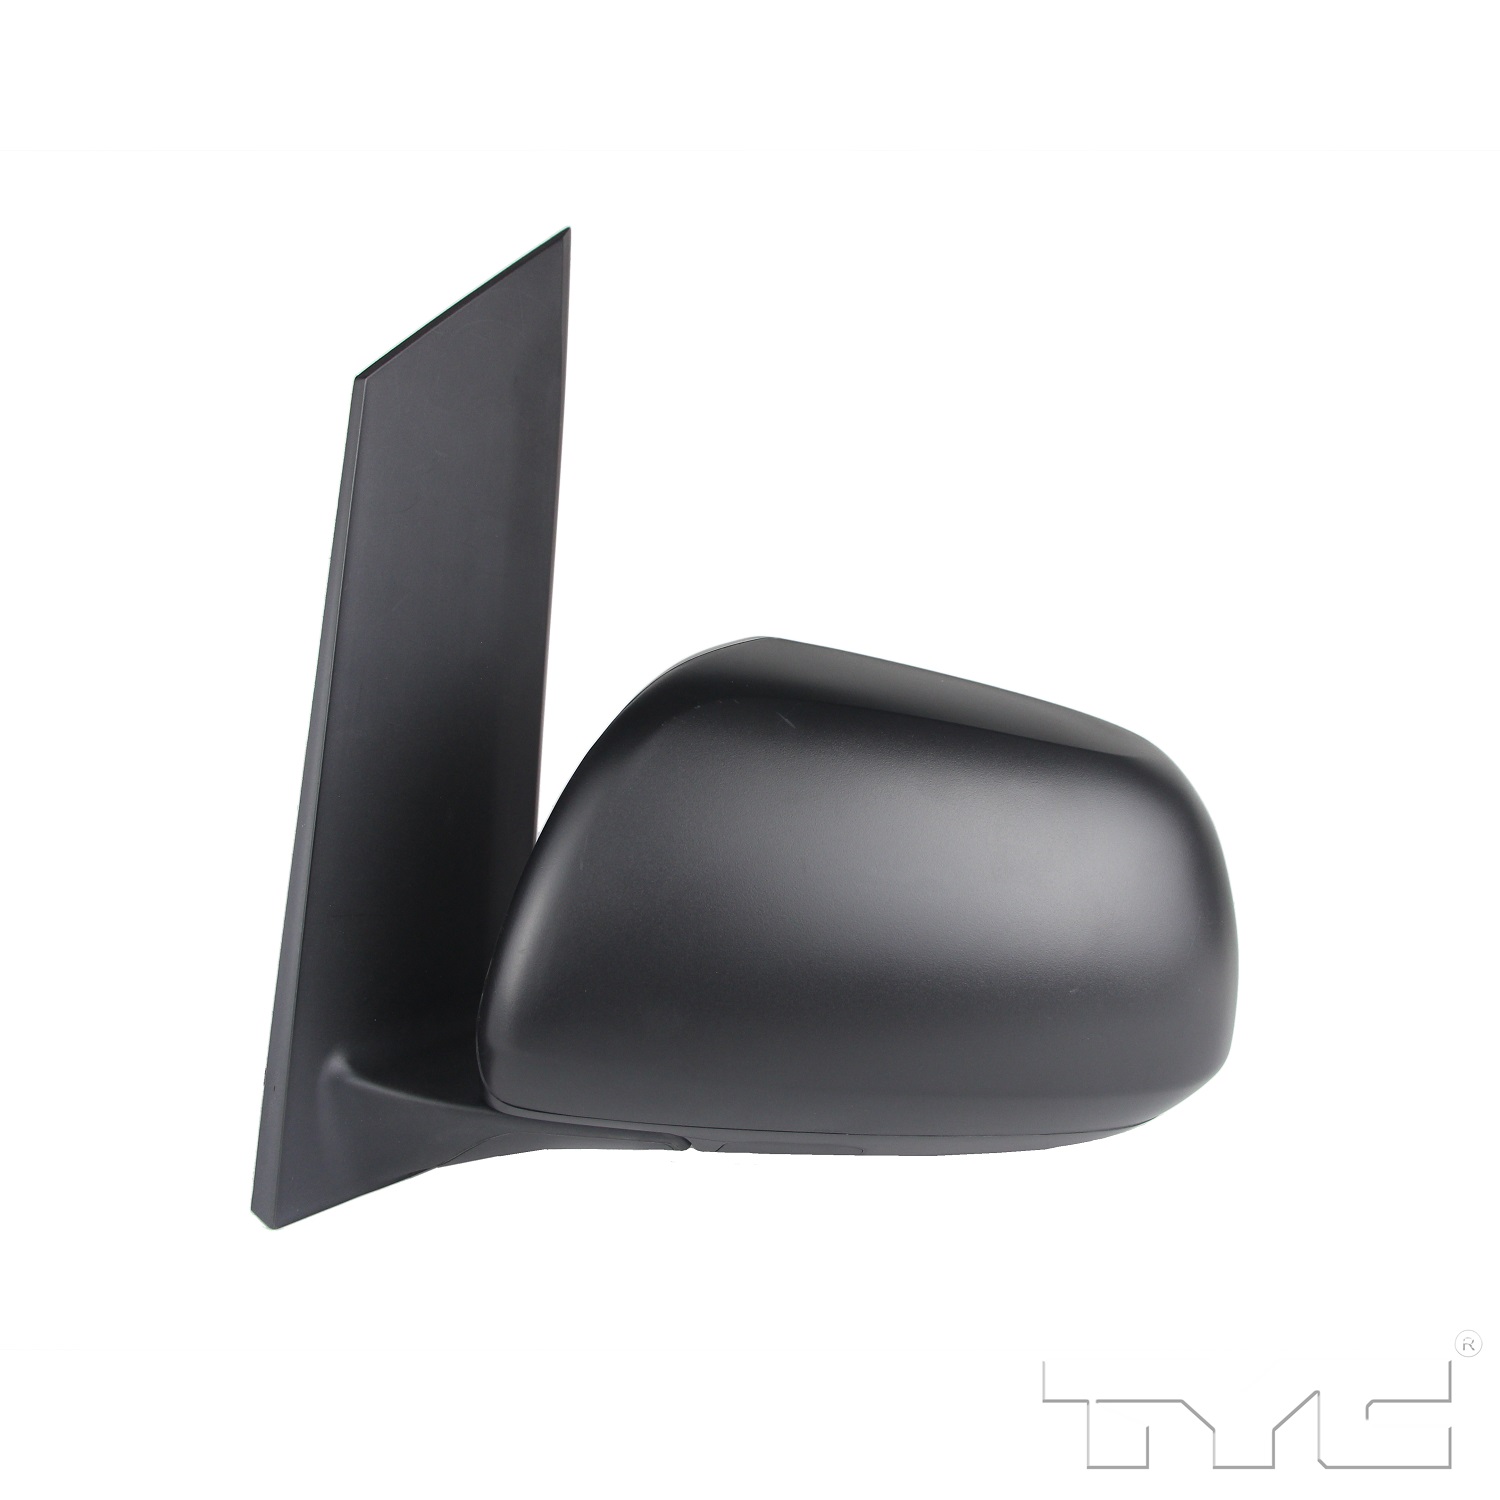 Aftermarket MIRRORS for TOYOTA - SIENNA, SIENNA,15-18,LT Mirror outside rear view